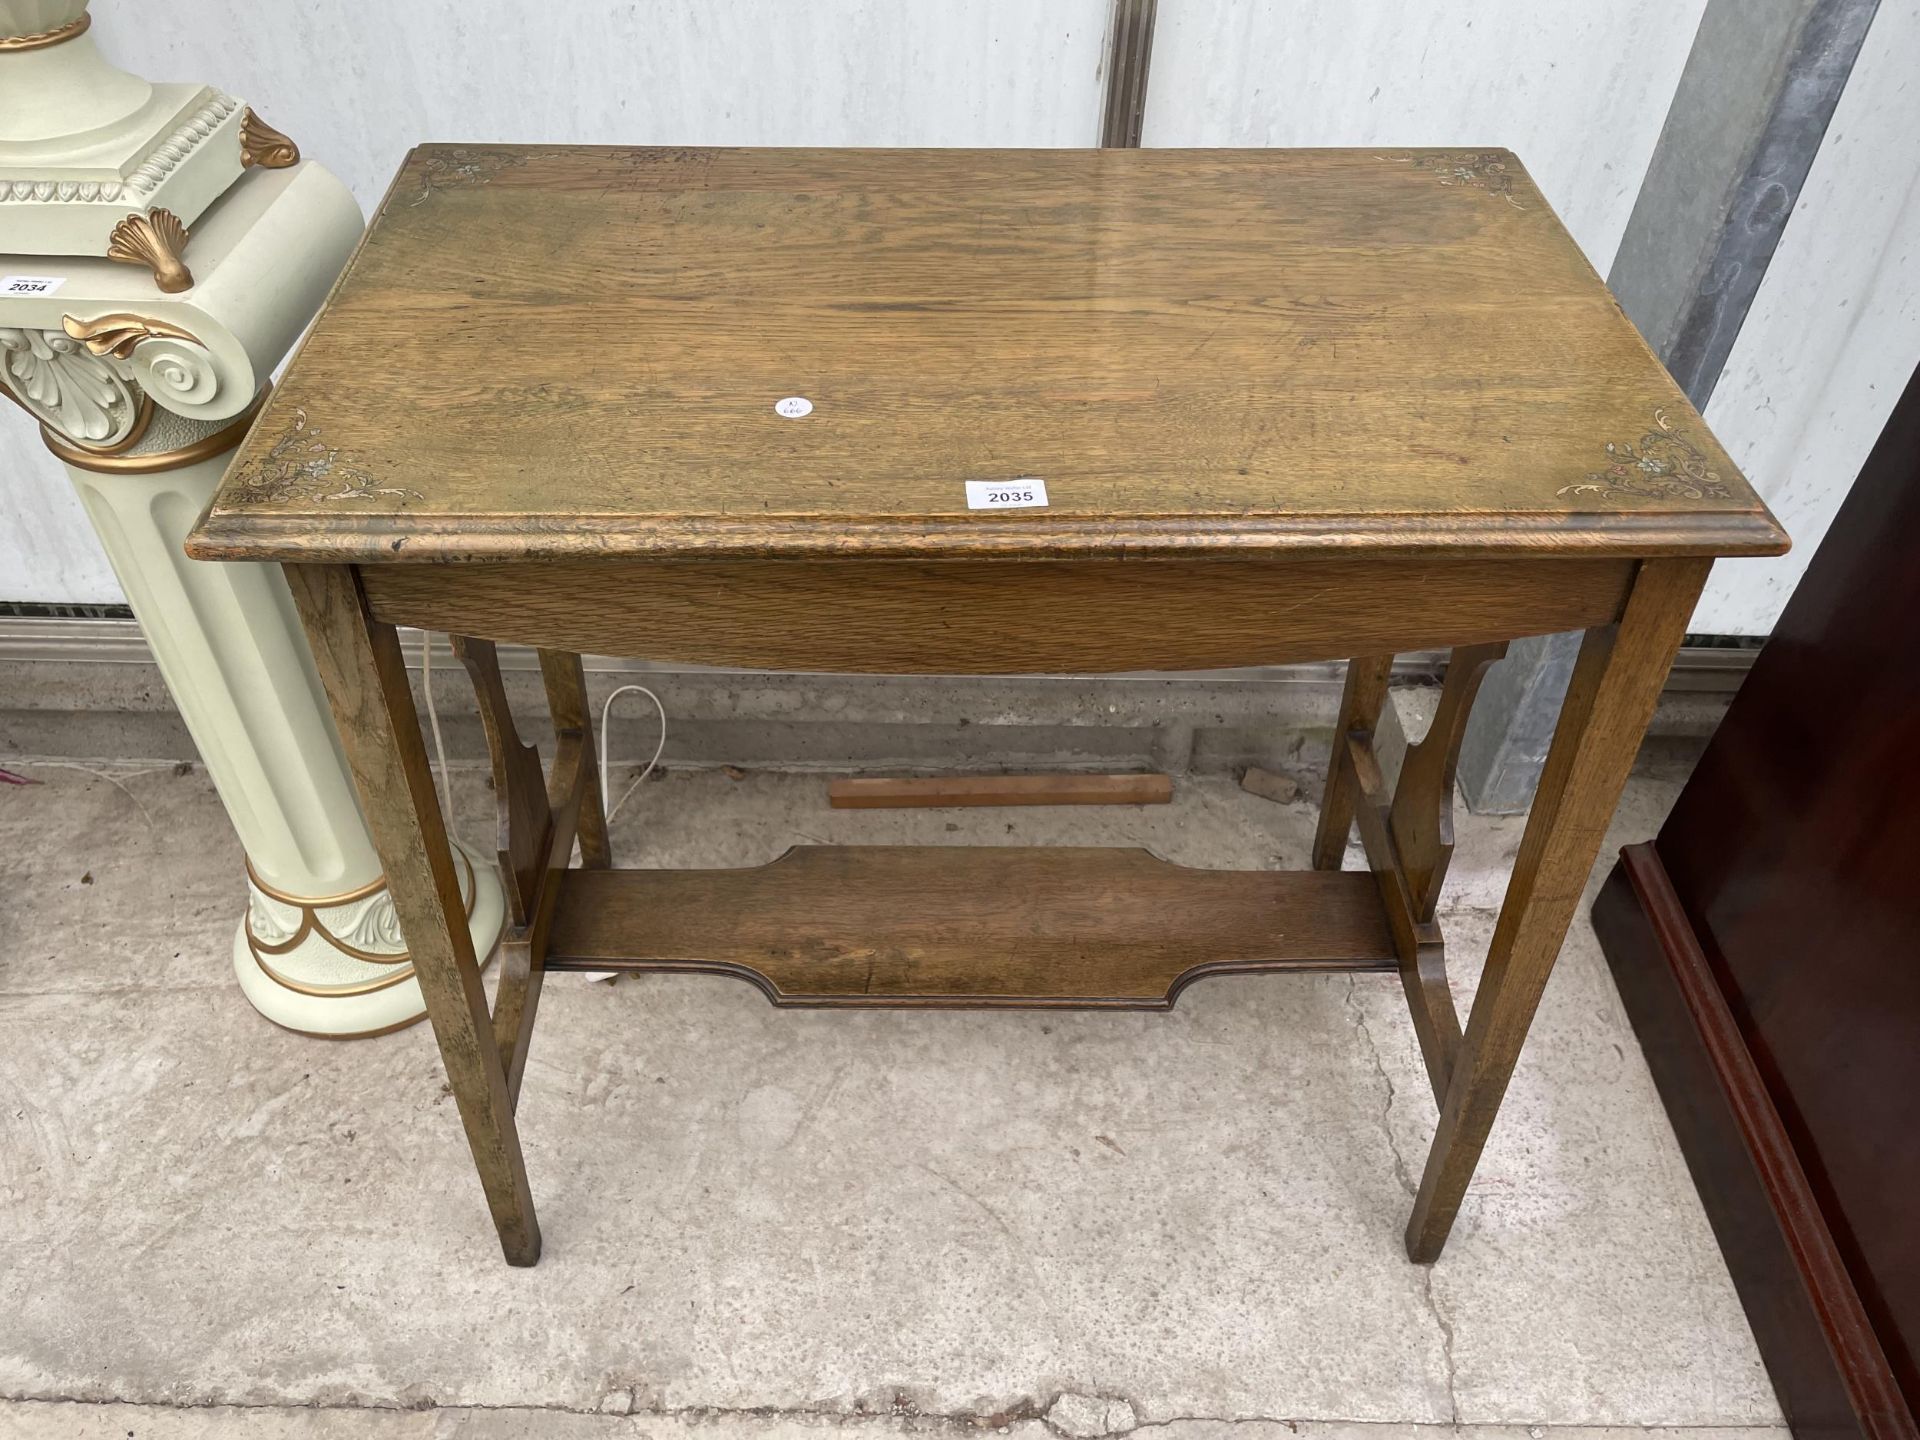 AN EARLY 20TH CENTURY OAK TWO TIER CENTRE TABLE WITH PAINTED FLORAL DECORATION TO THE TOP